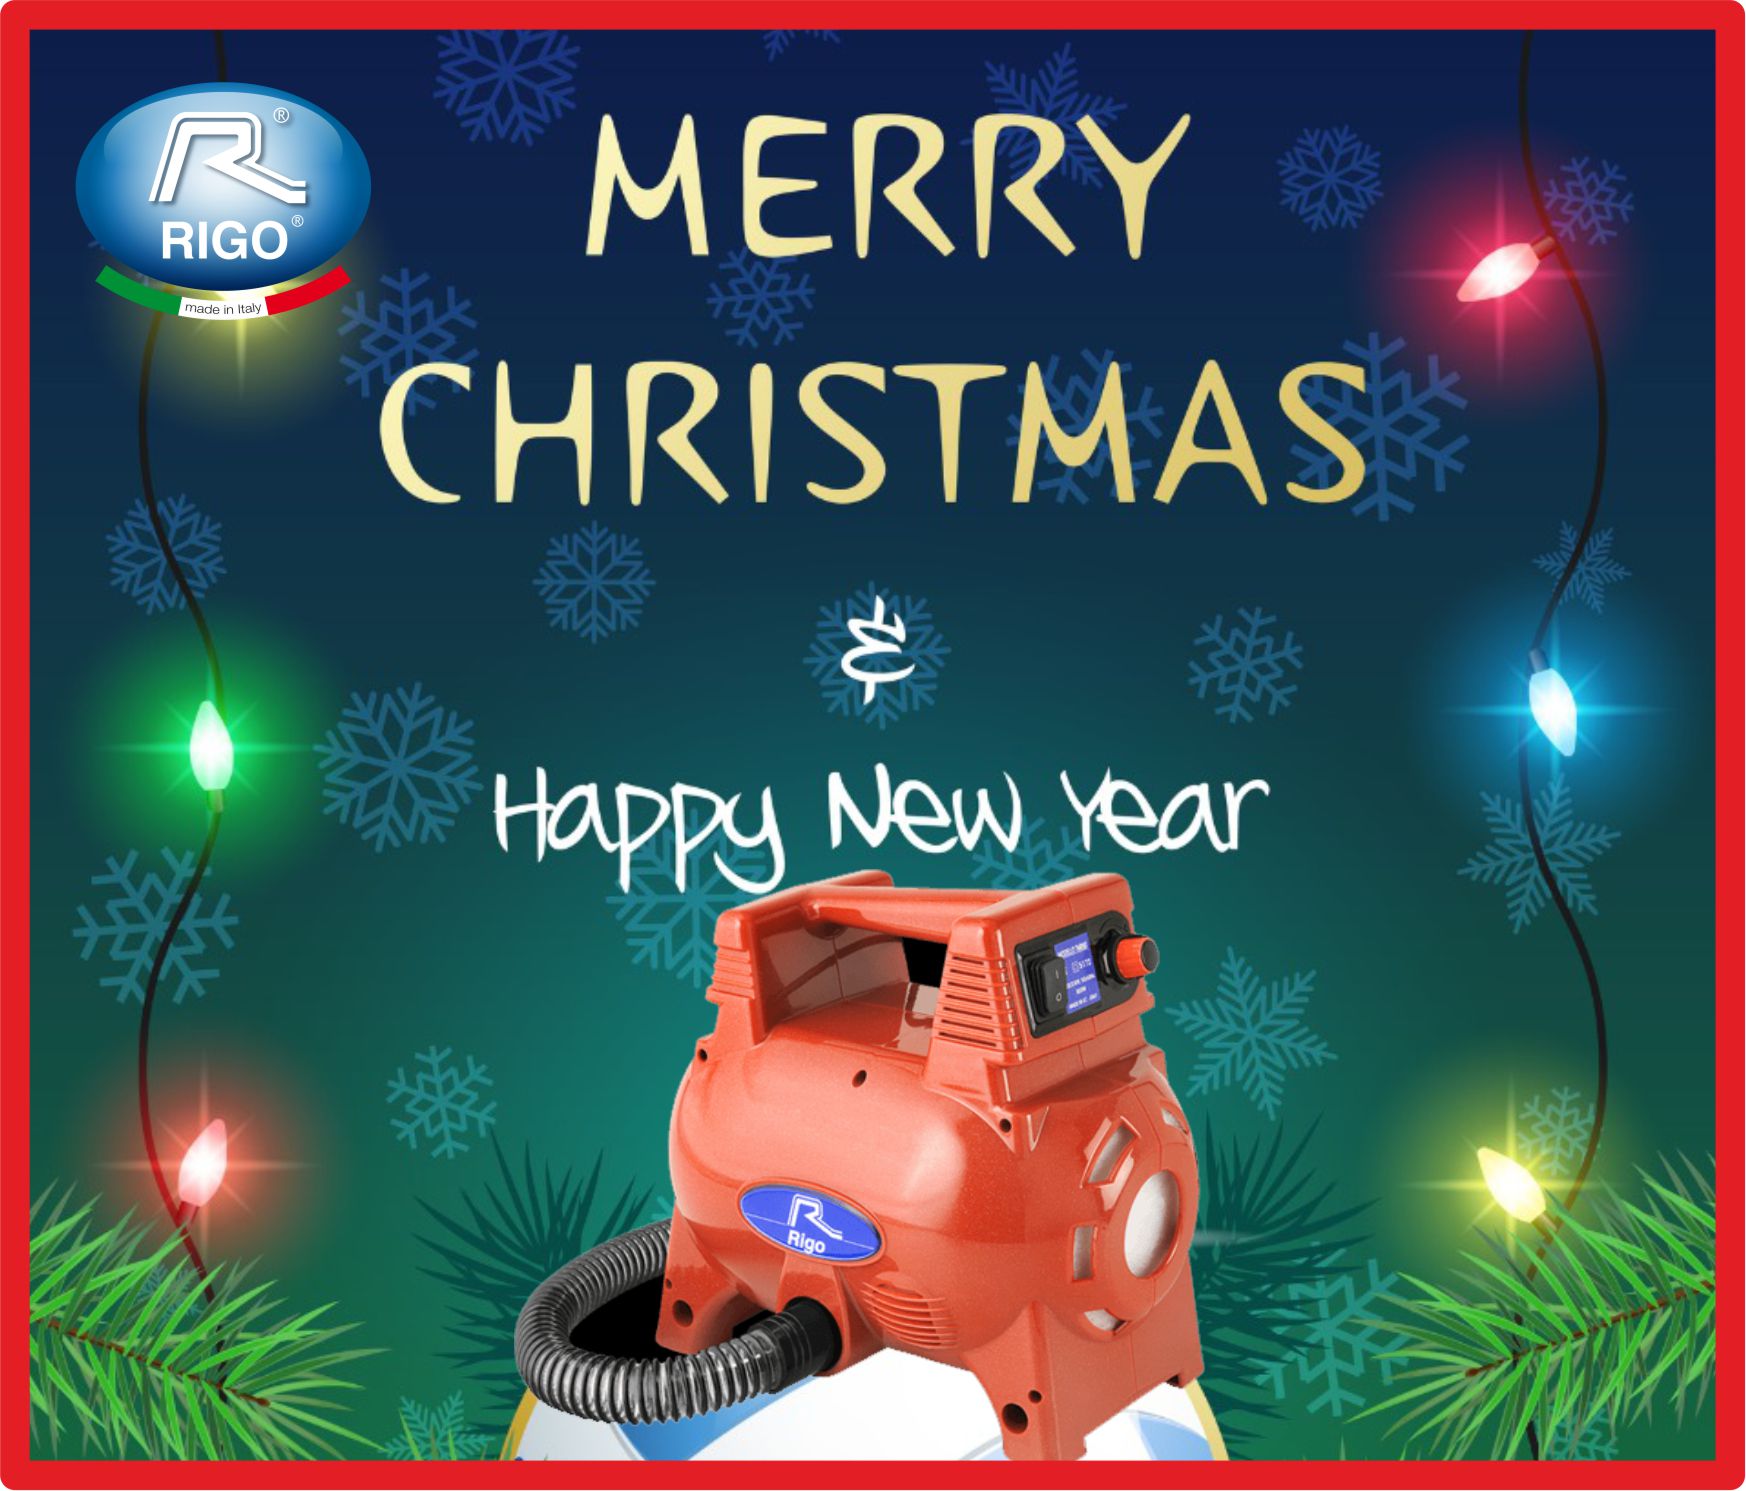 Buon Natale Happy New Year.Best Wishes For A Merry Christmas And A Happy New Year Rigo Srl